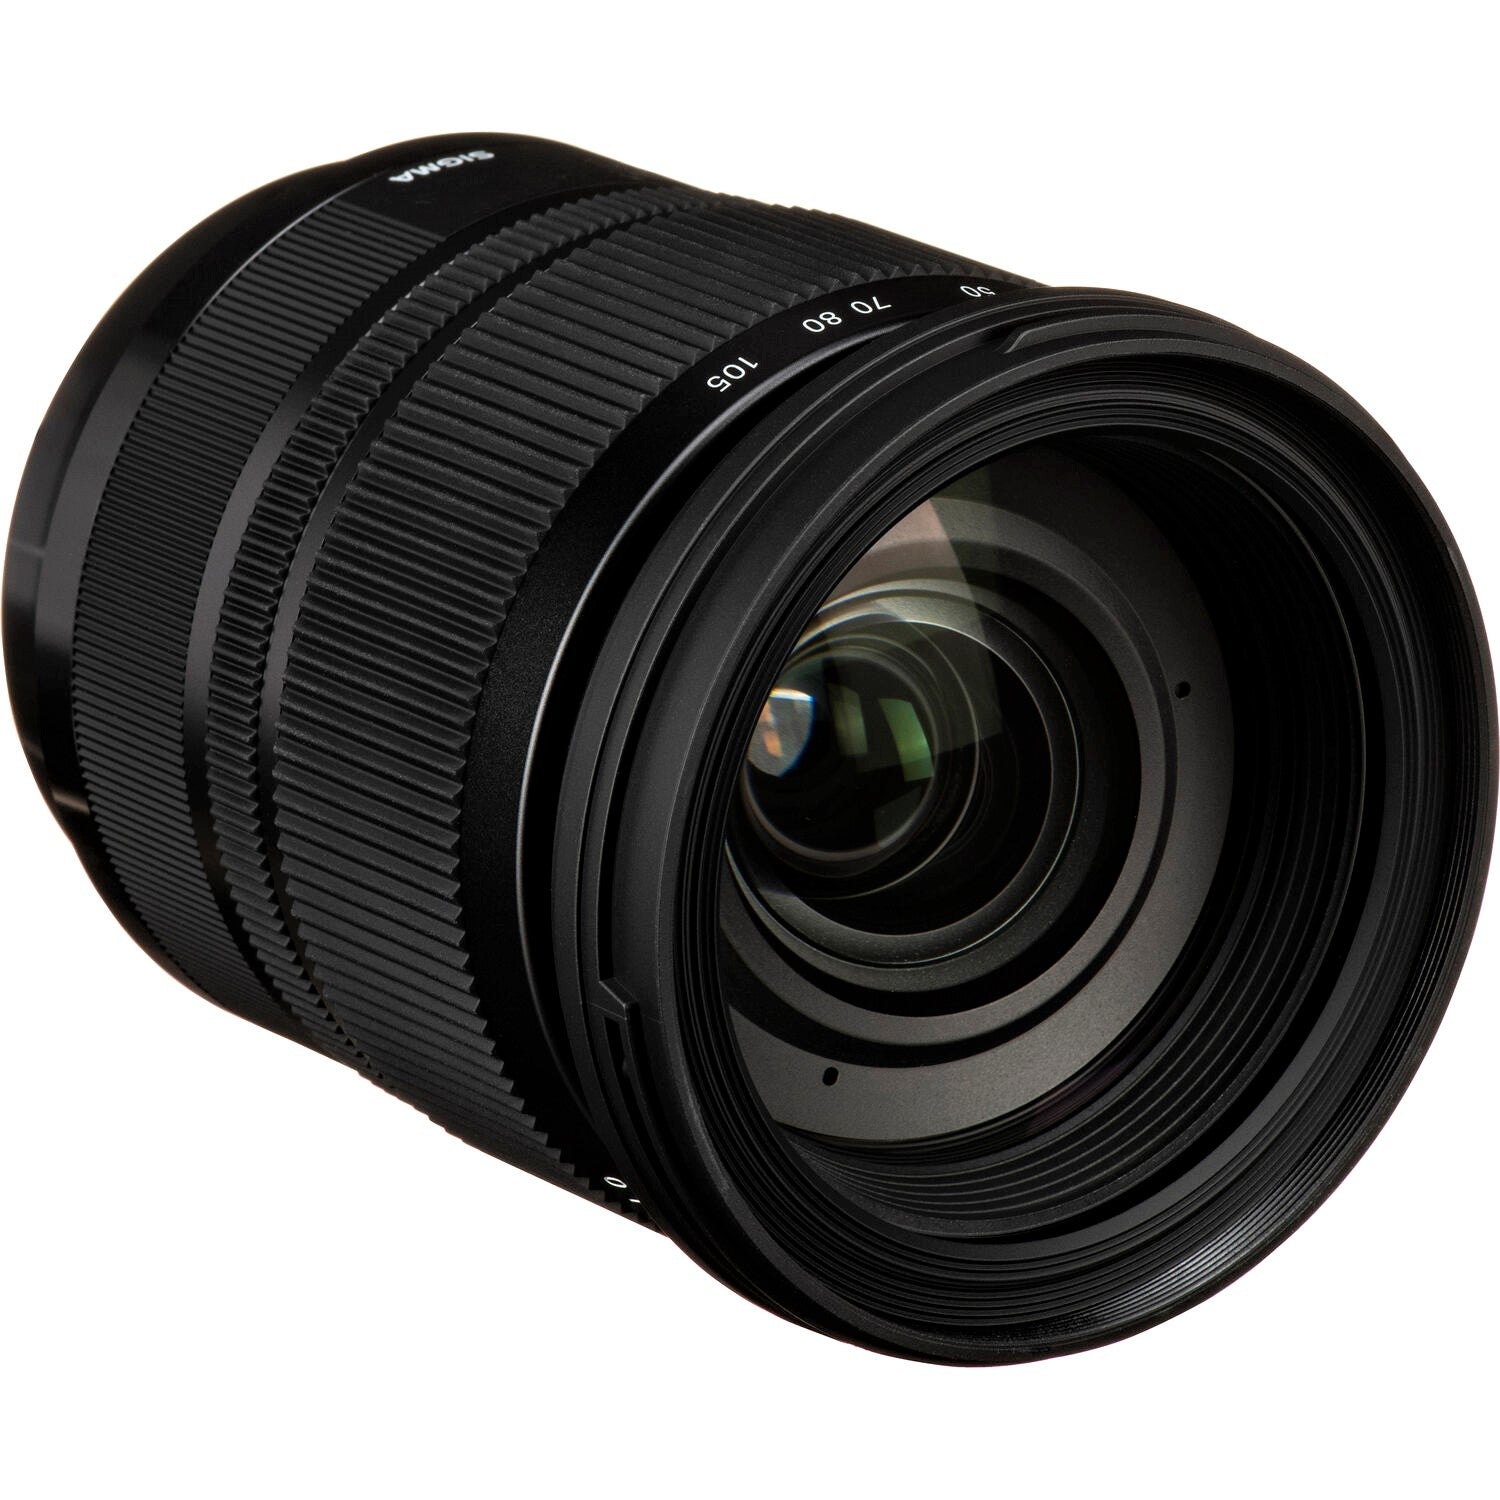 Sigma 24-105mm F4.0 DG OS HSM Art Lens (Sigma SA) in a Front-Side View